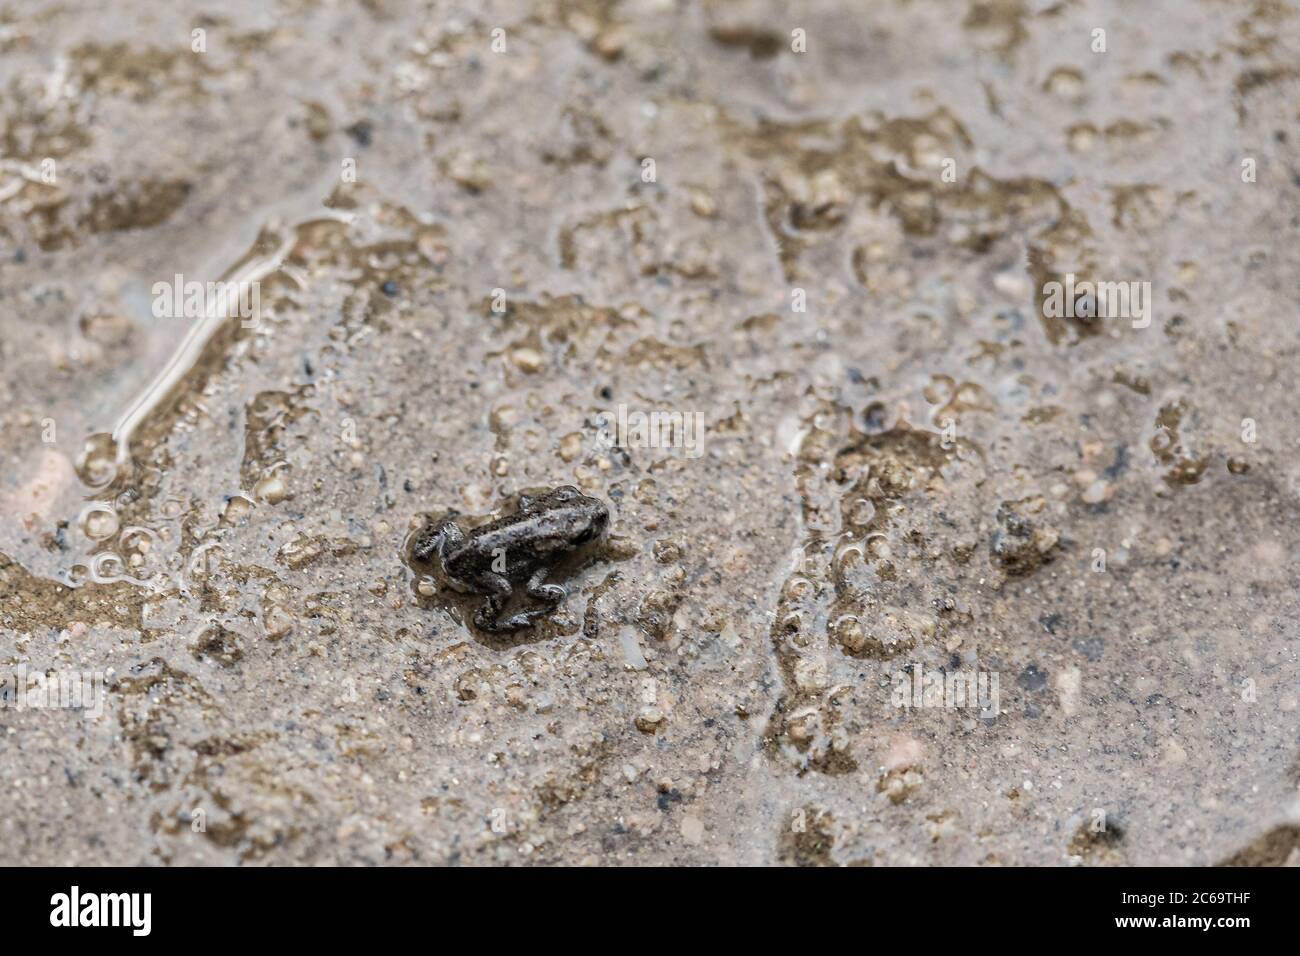 Tiny little frog camouflaged on a grey rock muddy background Stock Photo